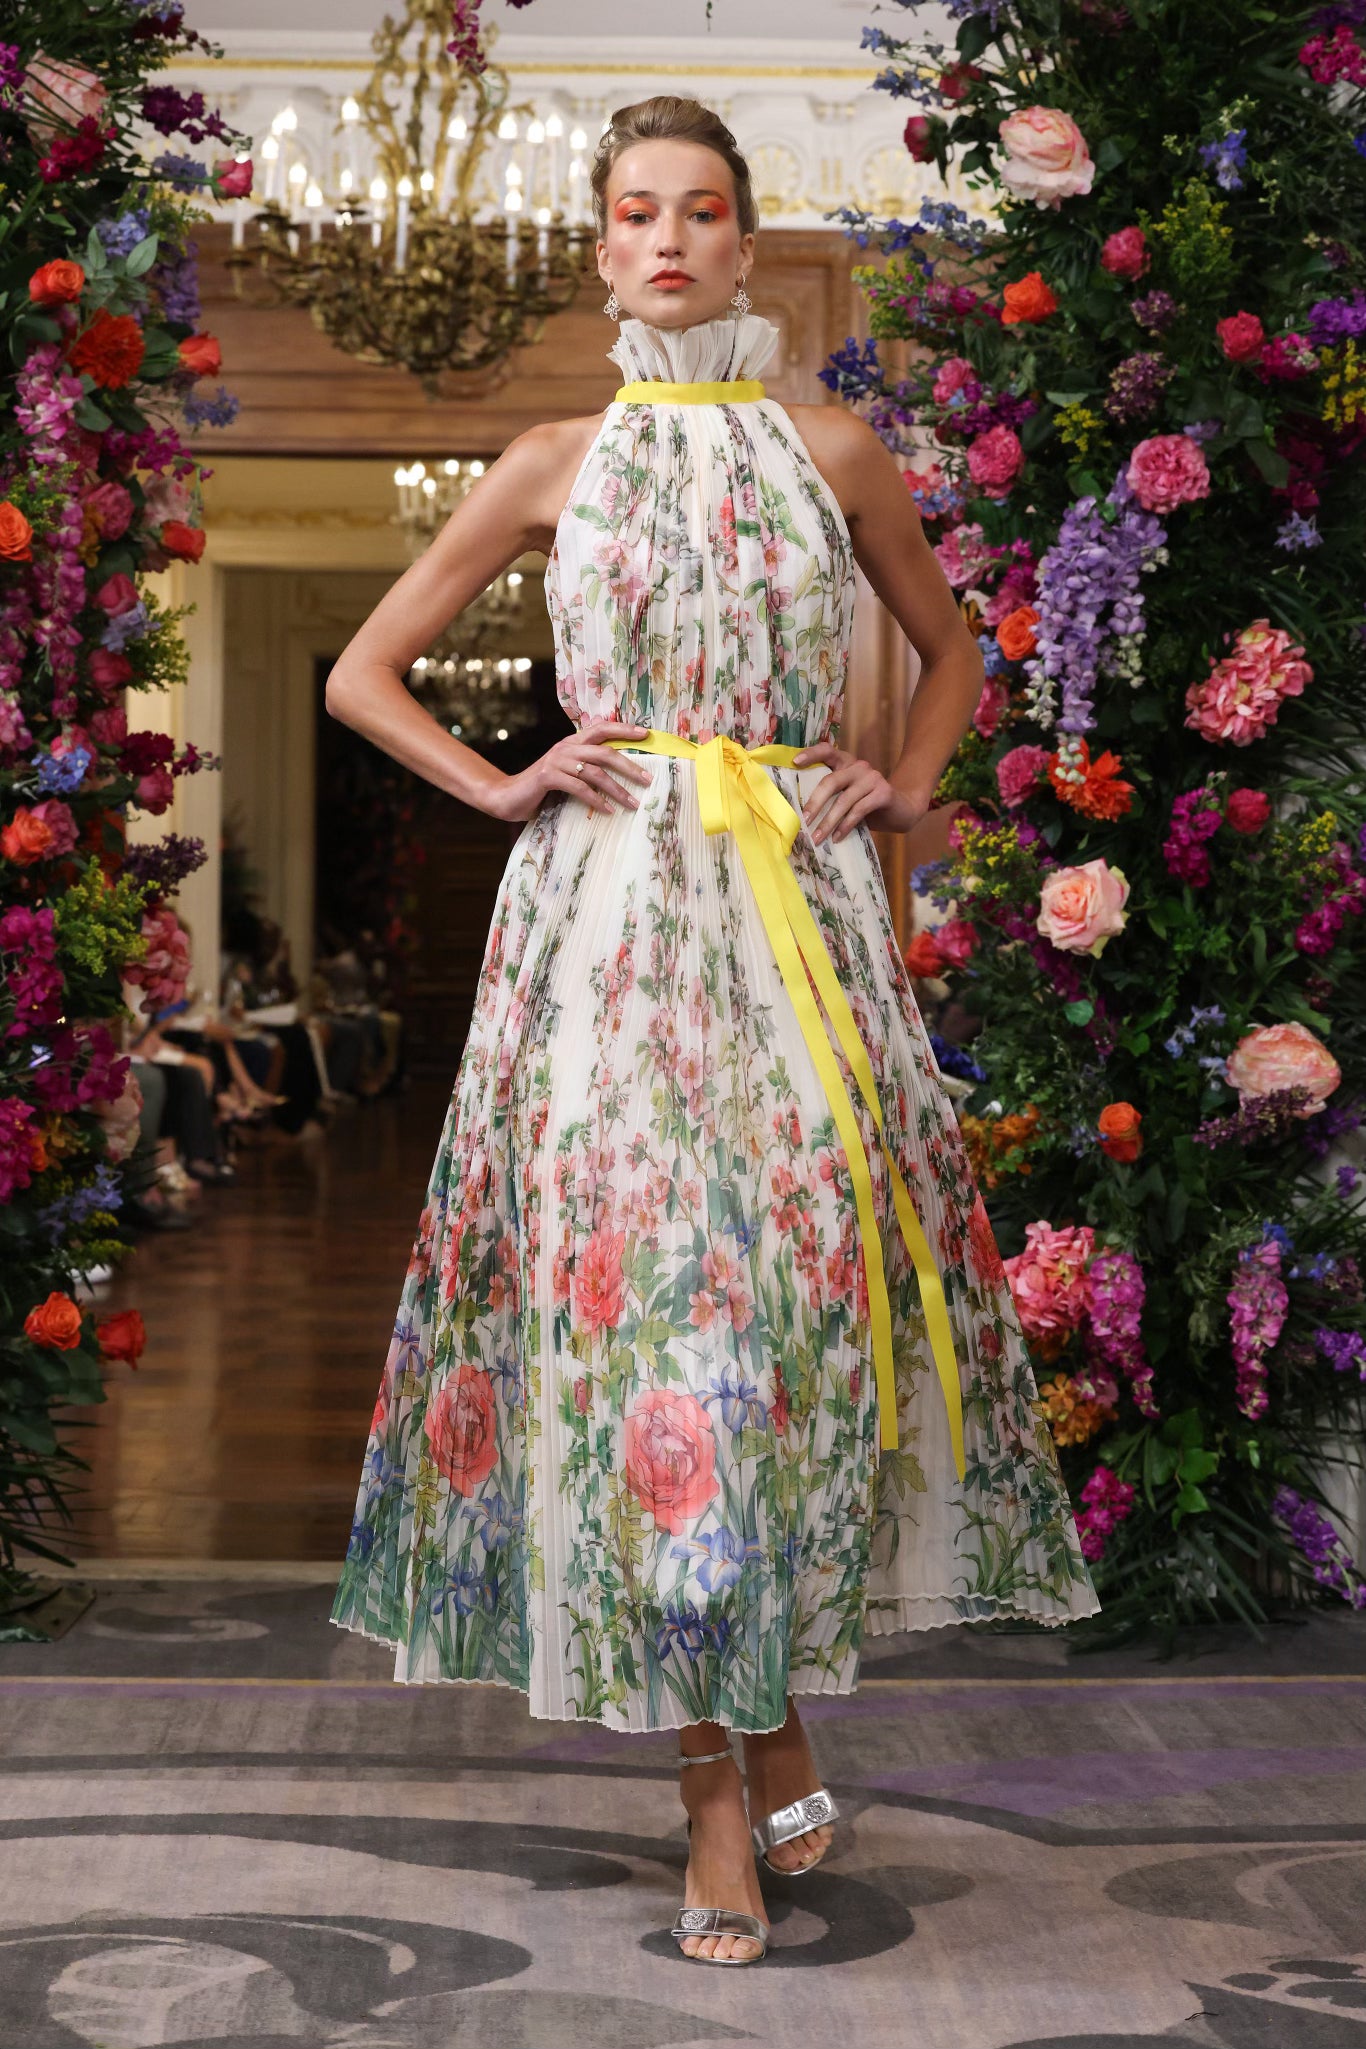 Straight Accordion pleated floral print organza with a yellow ribbon at the waist and neckline